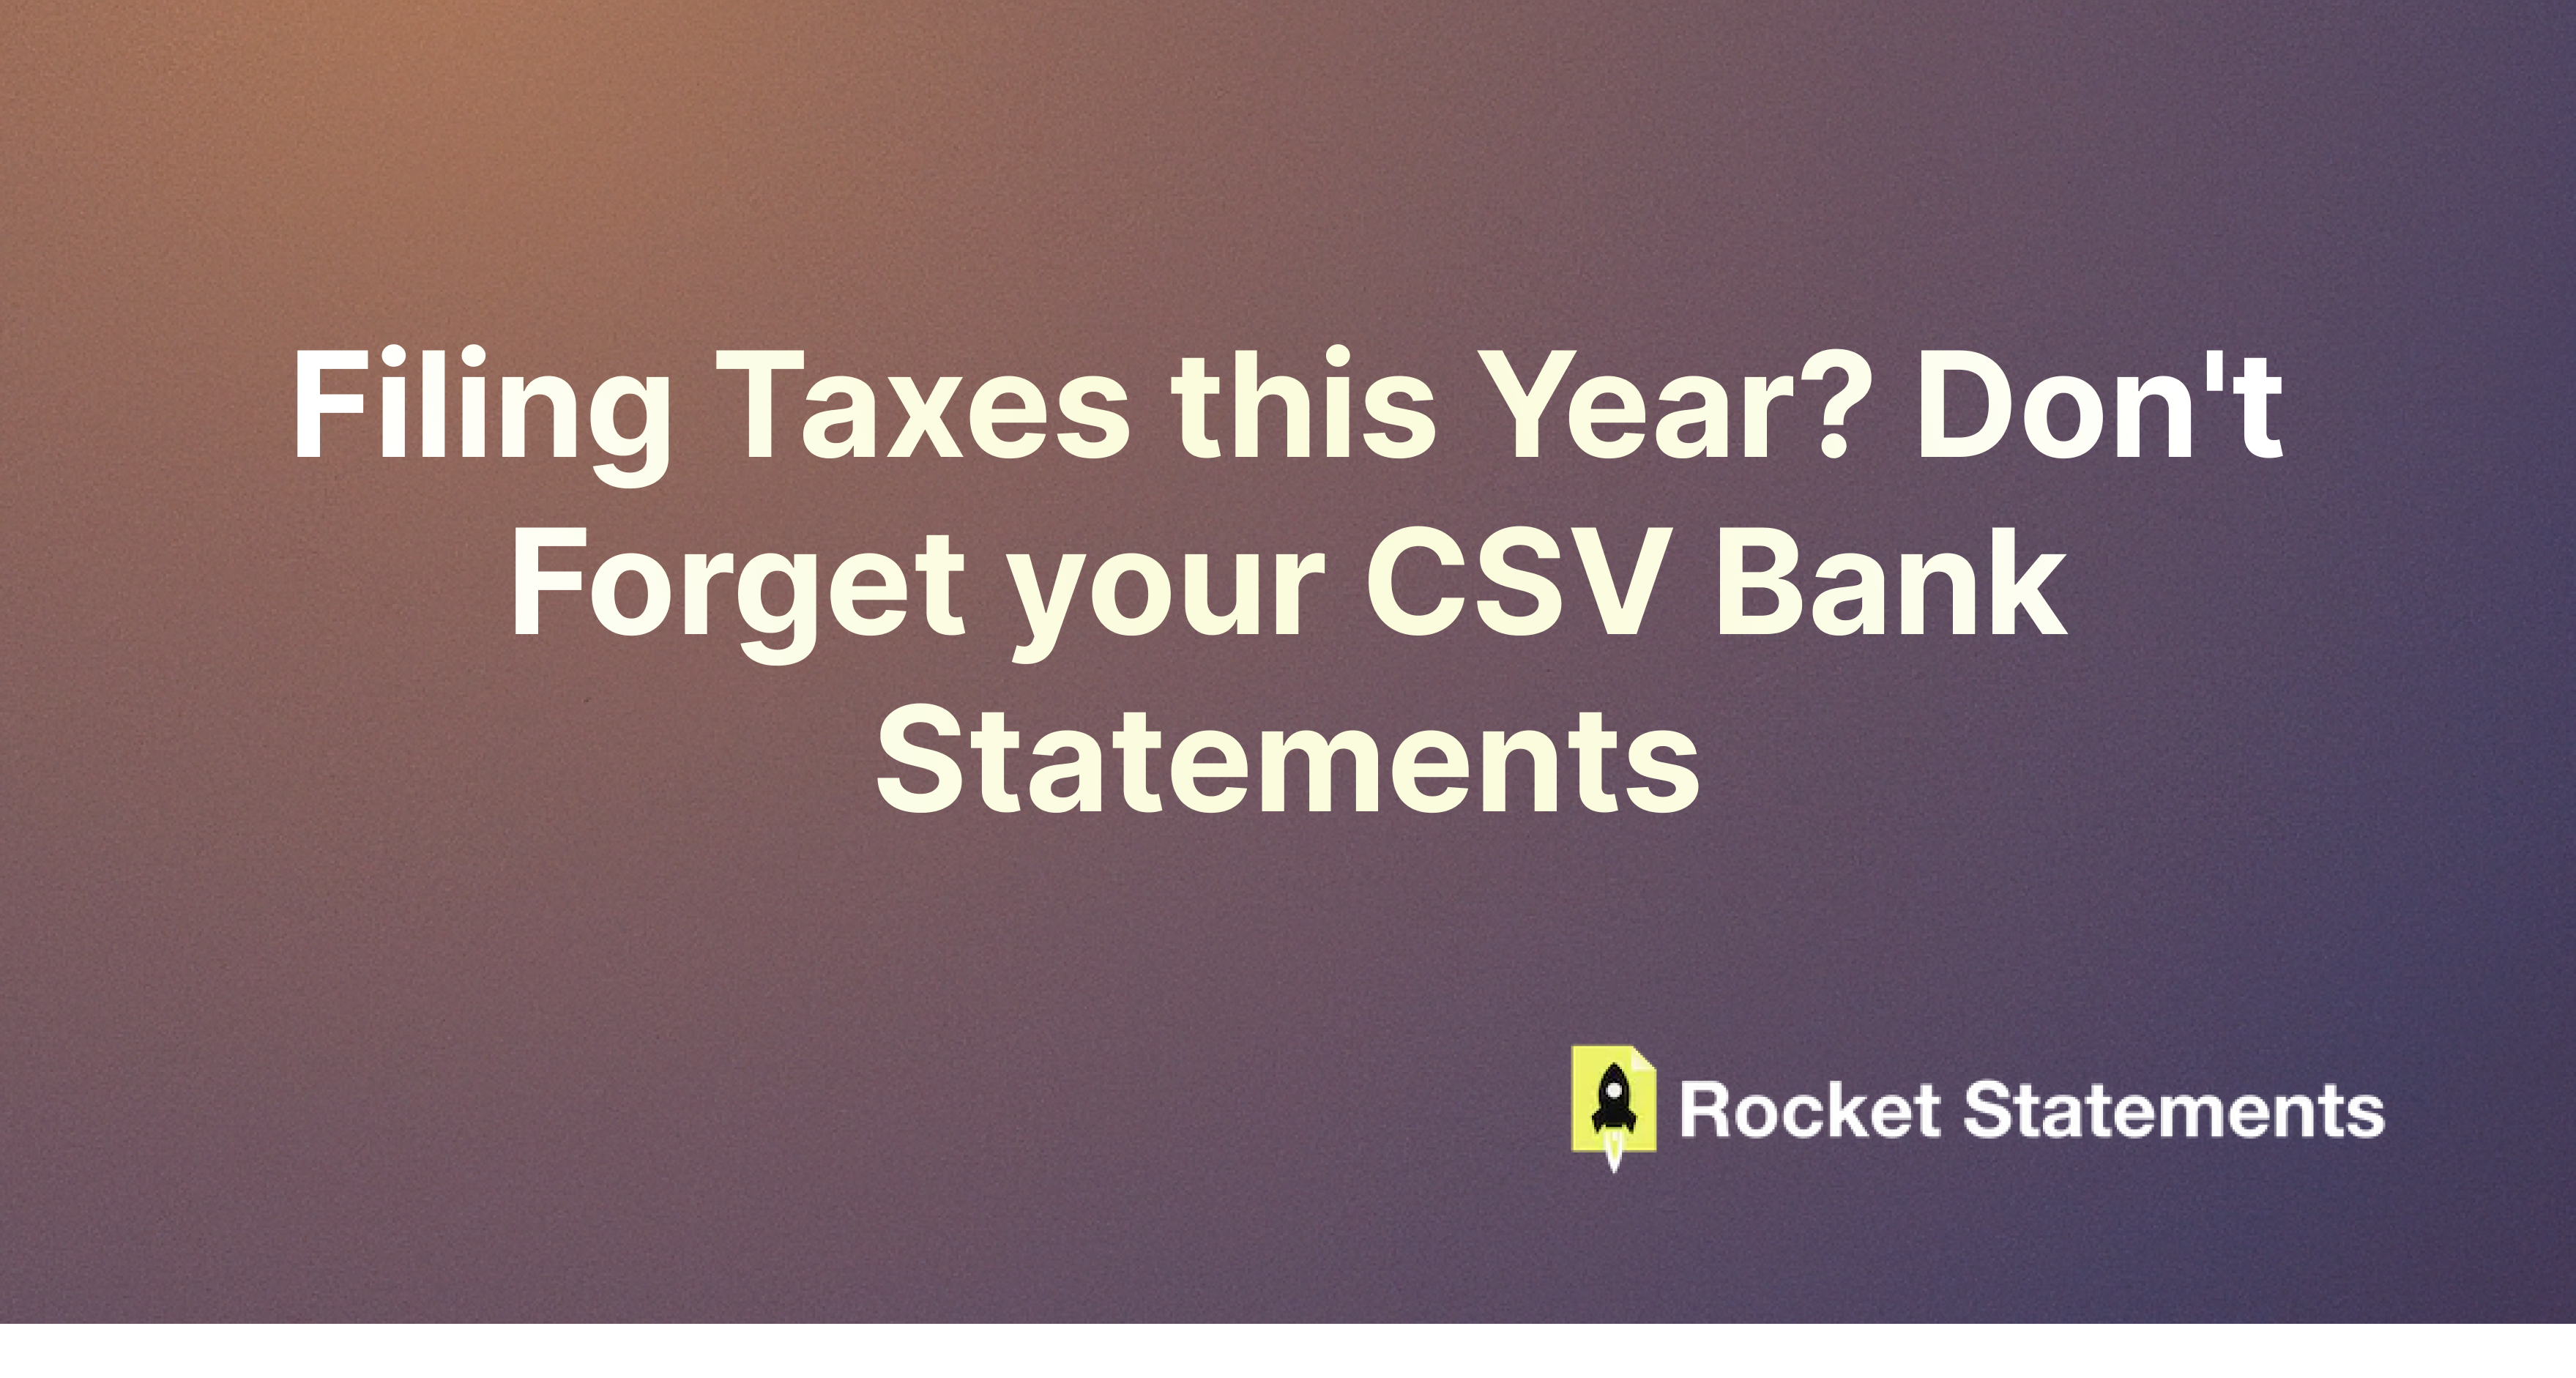 Filing Taxes this Year? Don't Forget your CSV Bank Statements